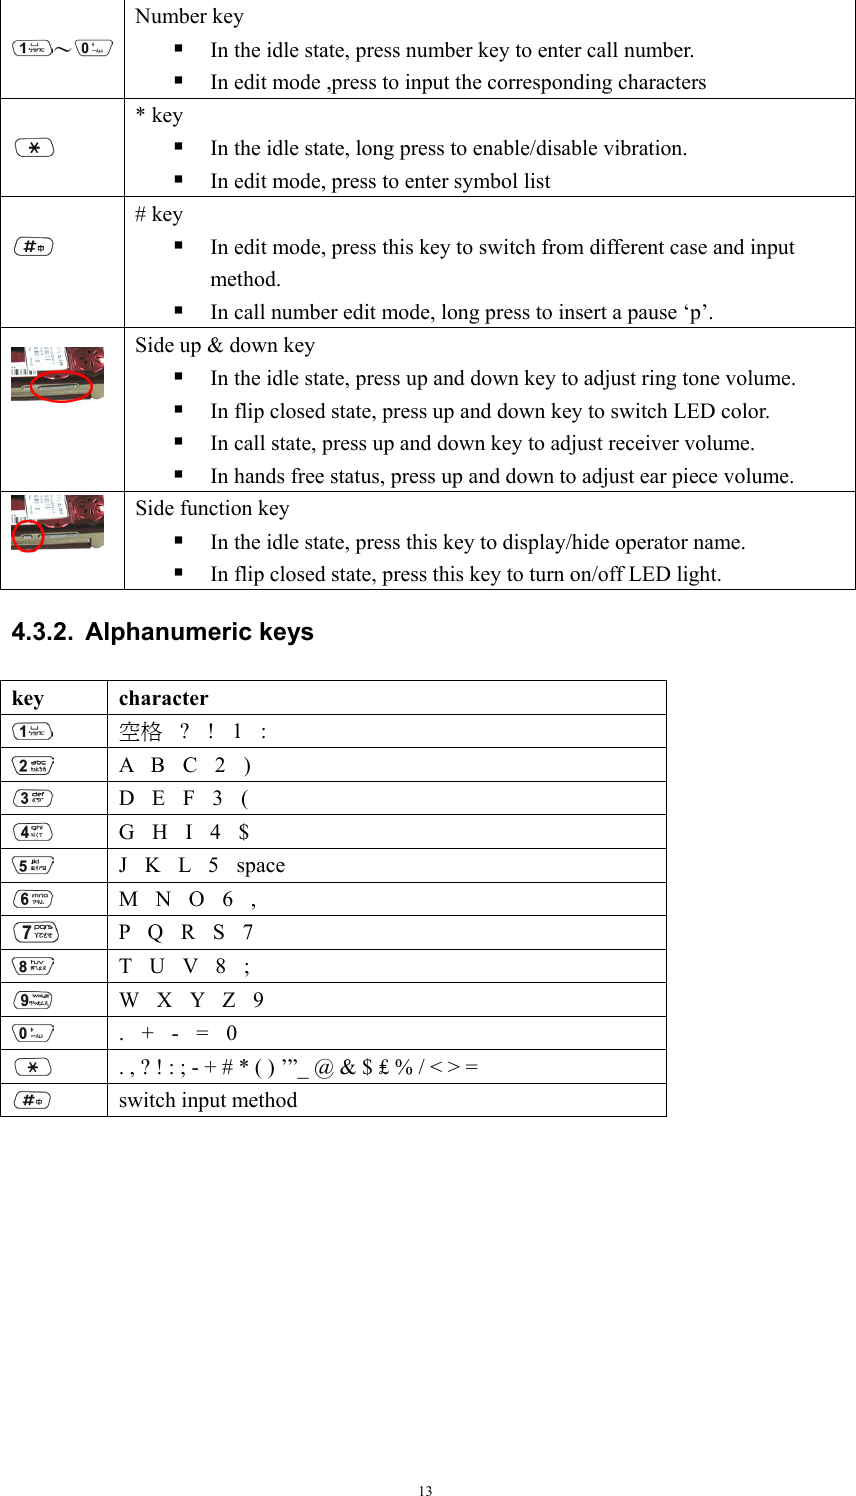 13   〜 Number key  In the idle state, press number key to enter call number.  In edit mode ,press to input the corresponding characters  * key  In the idle state, long press to enable/disable vibration.  In edit mode, press to enter symbol list   # key  In edit mode, press this key to switch from different case and input method.  In call number edit mode, long press to insert a pause ‘p’.   Side up &amp; down key  In the idle state, press up and down key to adjust ring tone volume.  In flip closed state, press up and down key to switch LED color.  In call state, press up and down key to adjust receiver volume.    In hands free status, press up and down to adjust ear piece volume.  Side function key  In the idle state, press this key to display/hide operator name.  In flip closed state, press this key to turn on/off LED light.  4.3.2. Alphanumeric keys  key character   空格  ?  !  1  :  A  B  C  2  )  D  E  F  3  (  G  H  I  4  $  J  K  L  5  space  M  N  O  6  ,  P  Q  R  S  7  T  U  V  8  ;  W  X  Y  Z  9  .  +  -  =  0  . , ? ! : ; - + # * ( ) ’”_ @ &amp; $ ₤ % / &lt; &gt; =  switch input method      